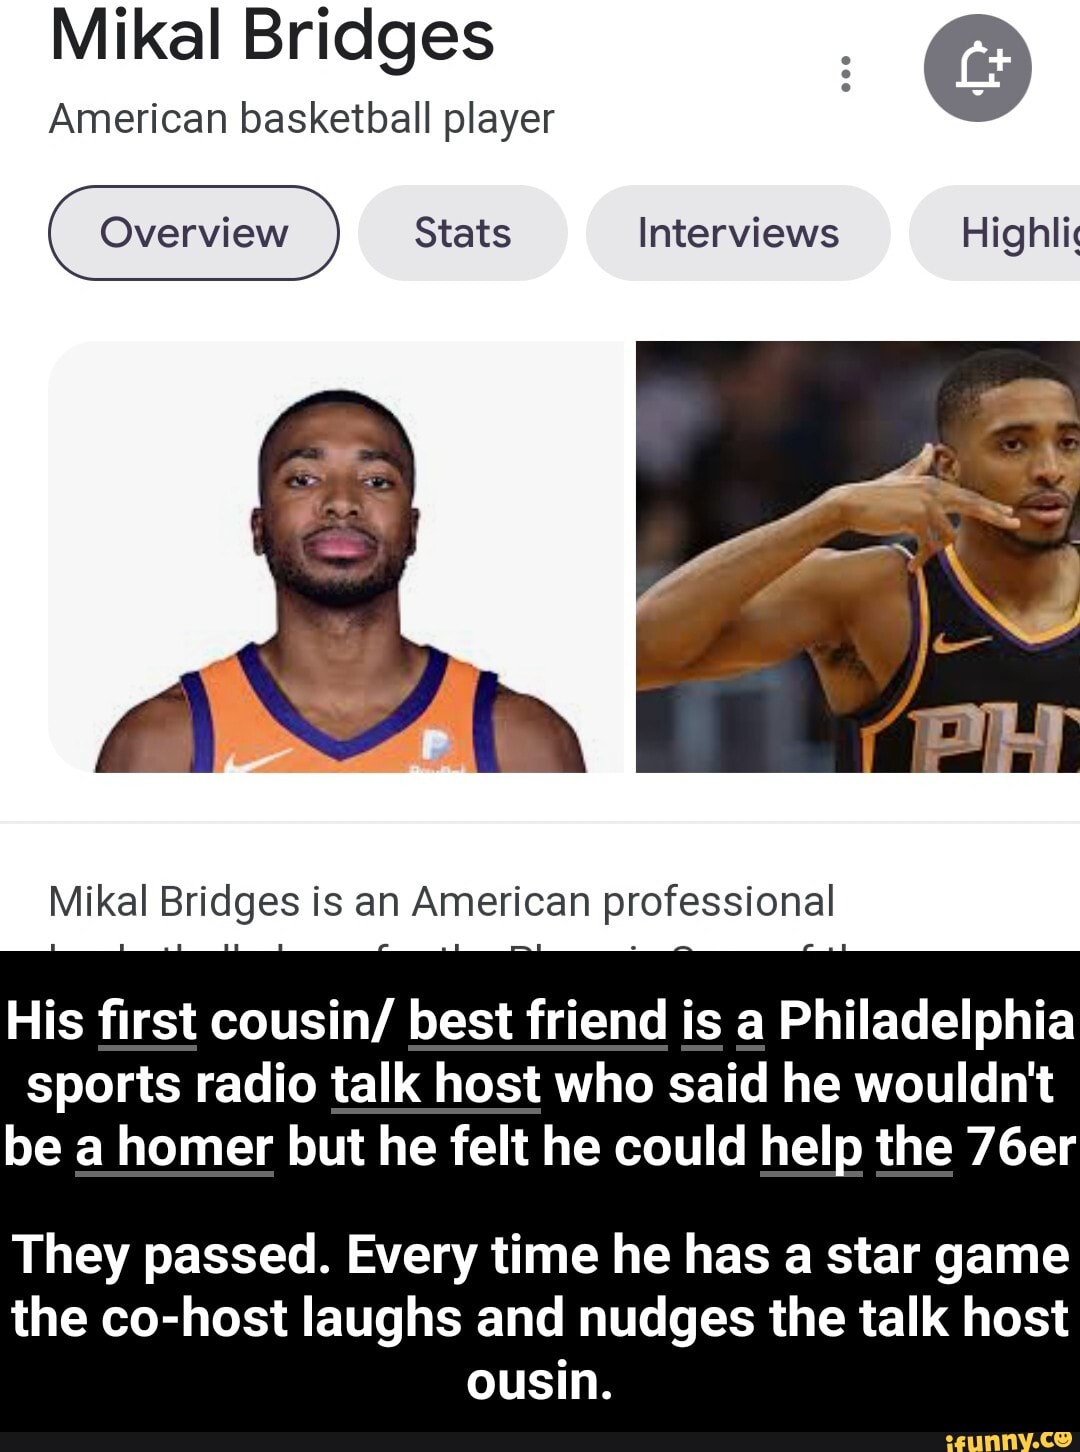 Can a professional athlete be a good friend?